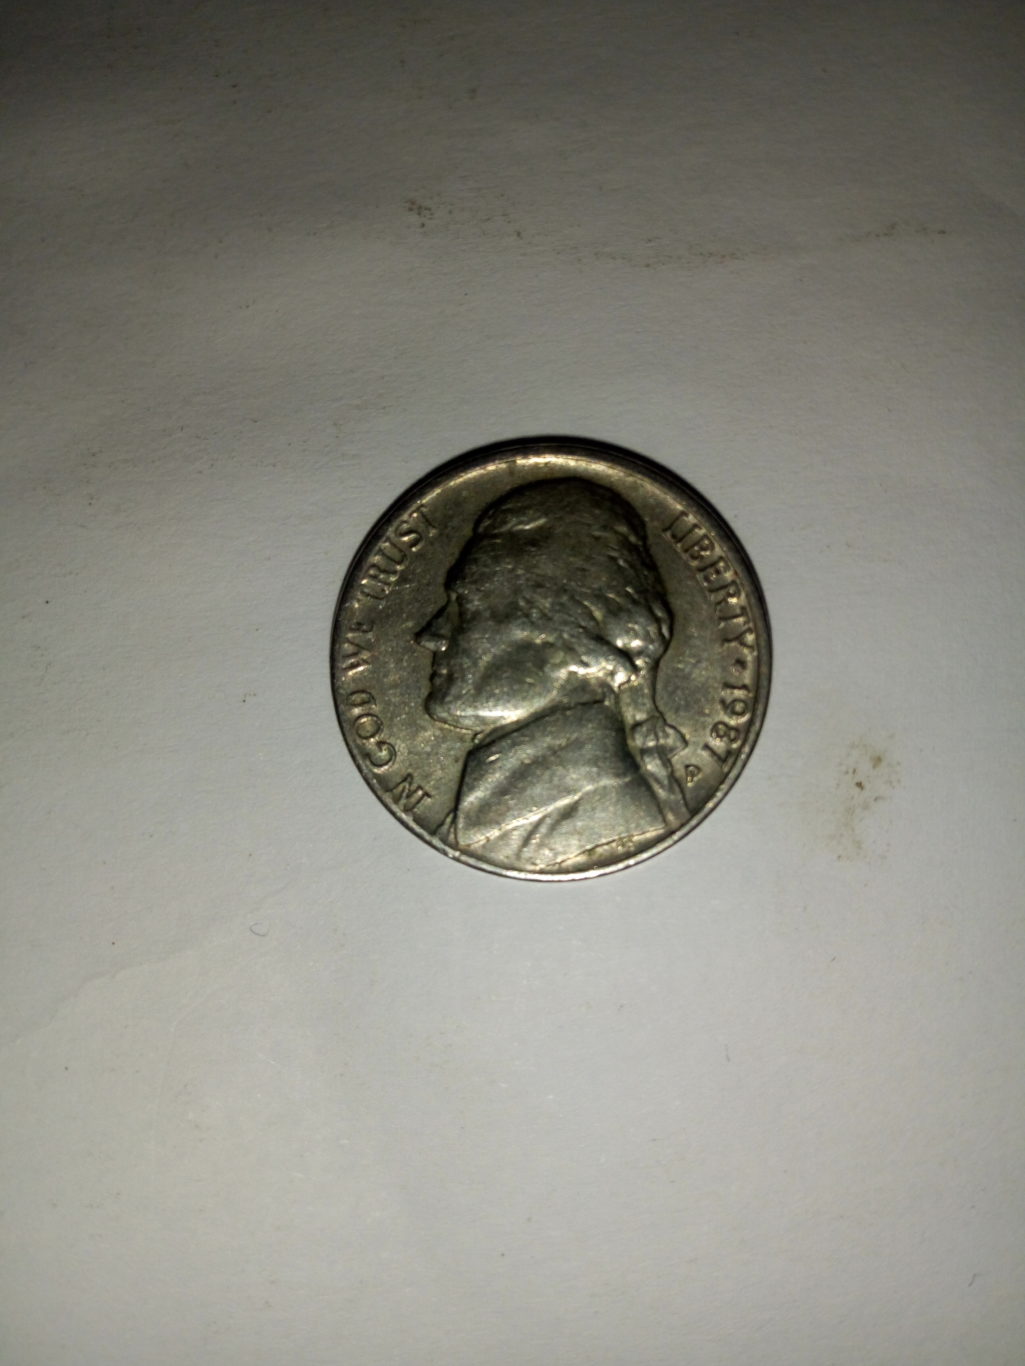 1987_united states of America 5 cents